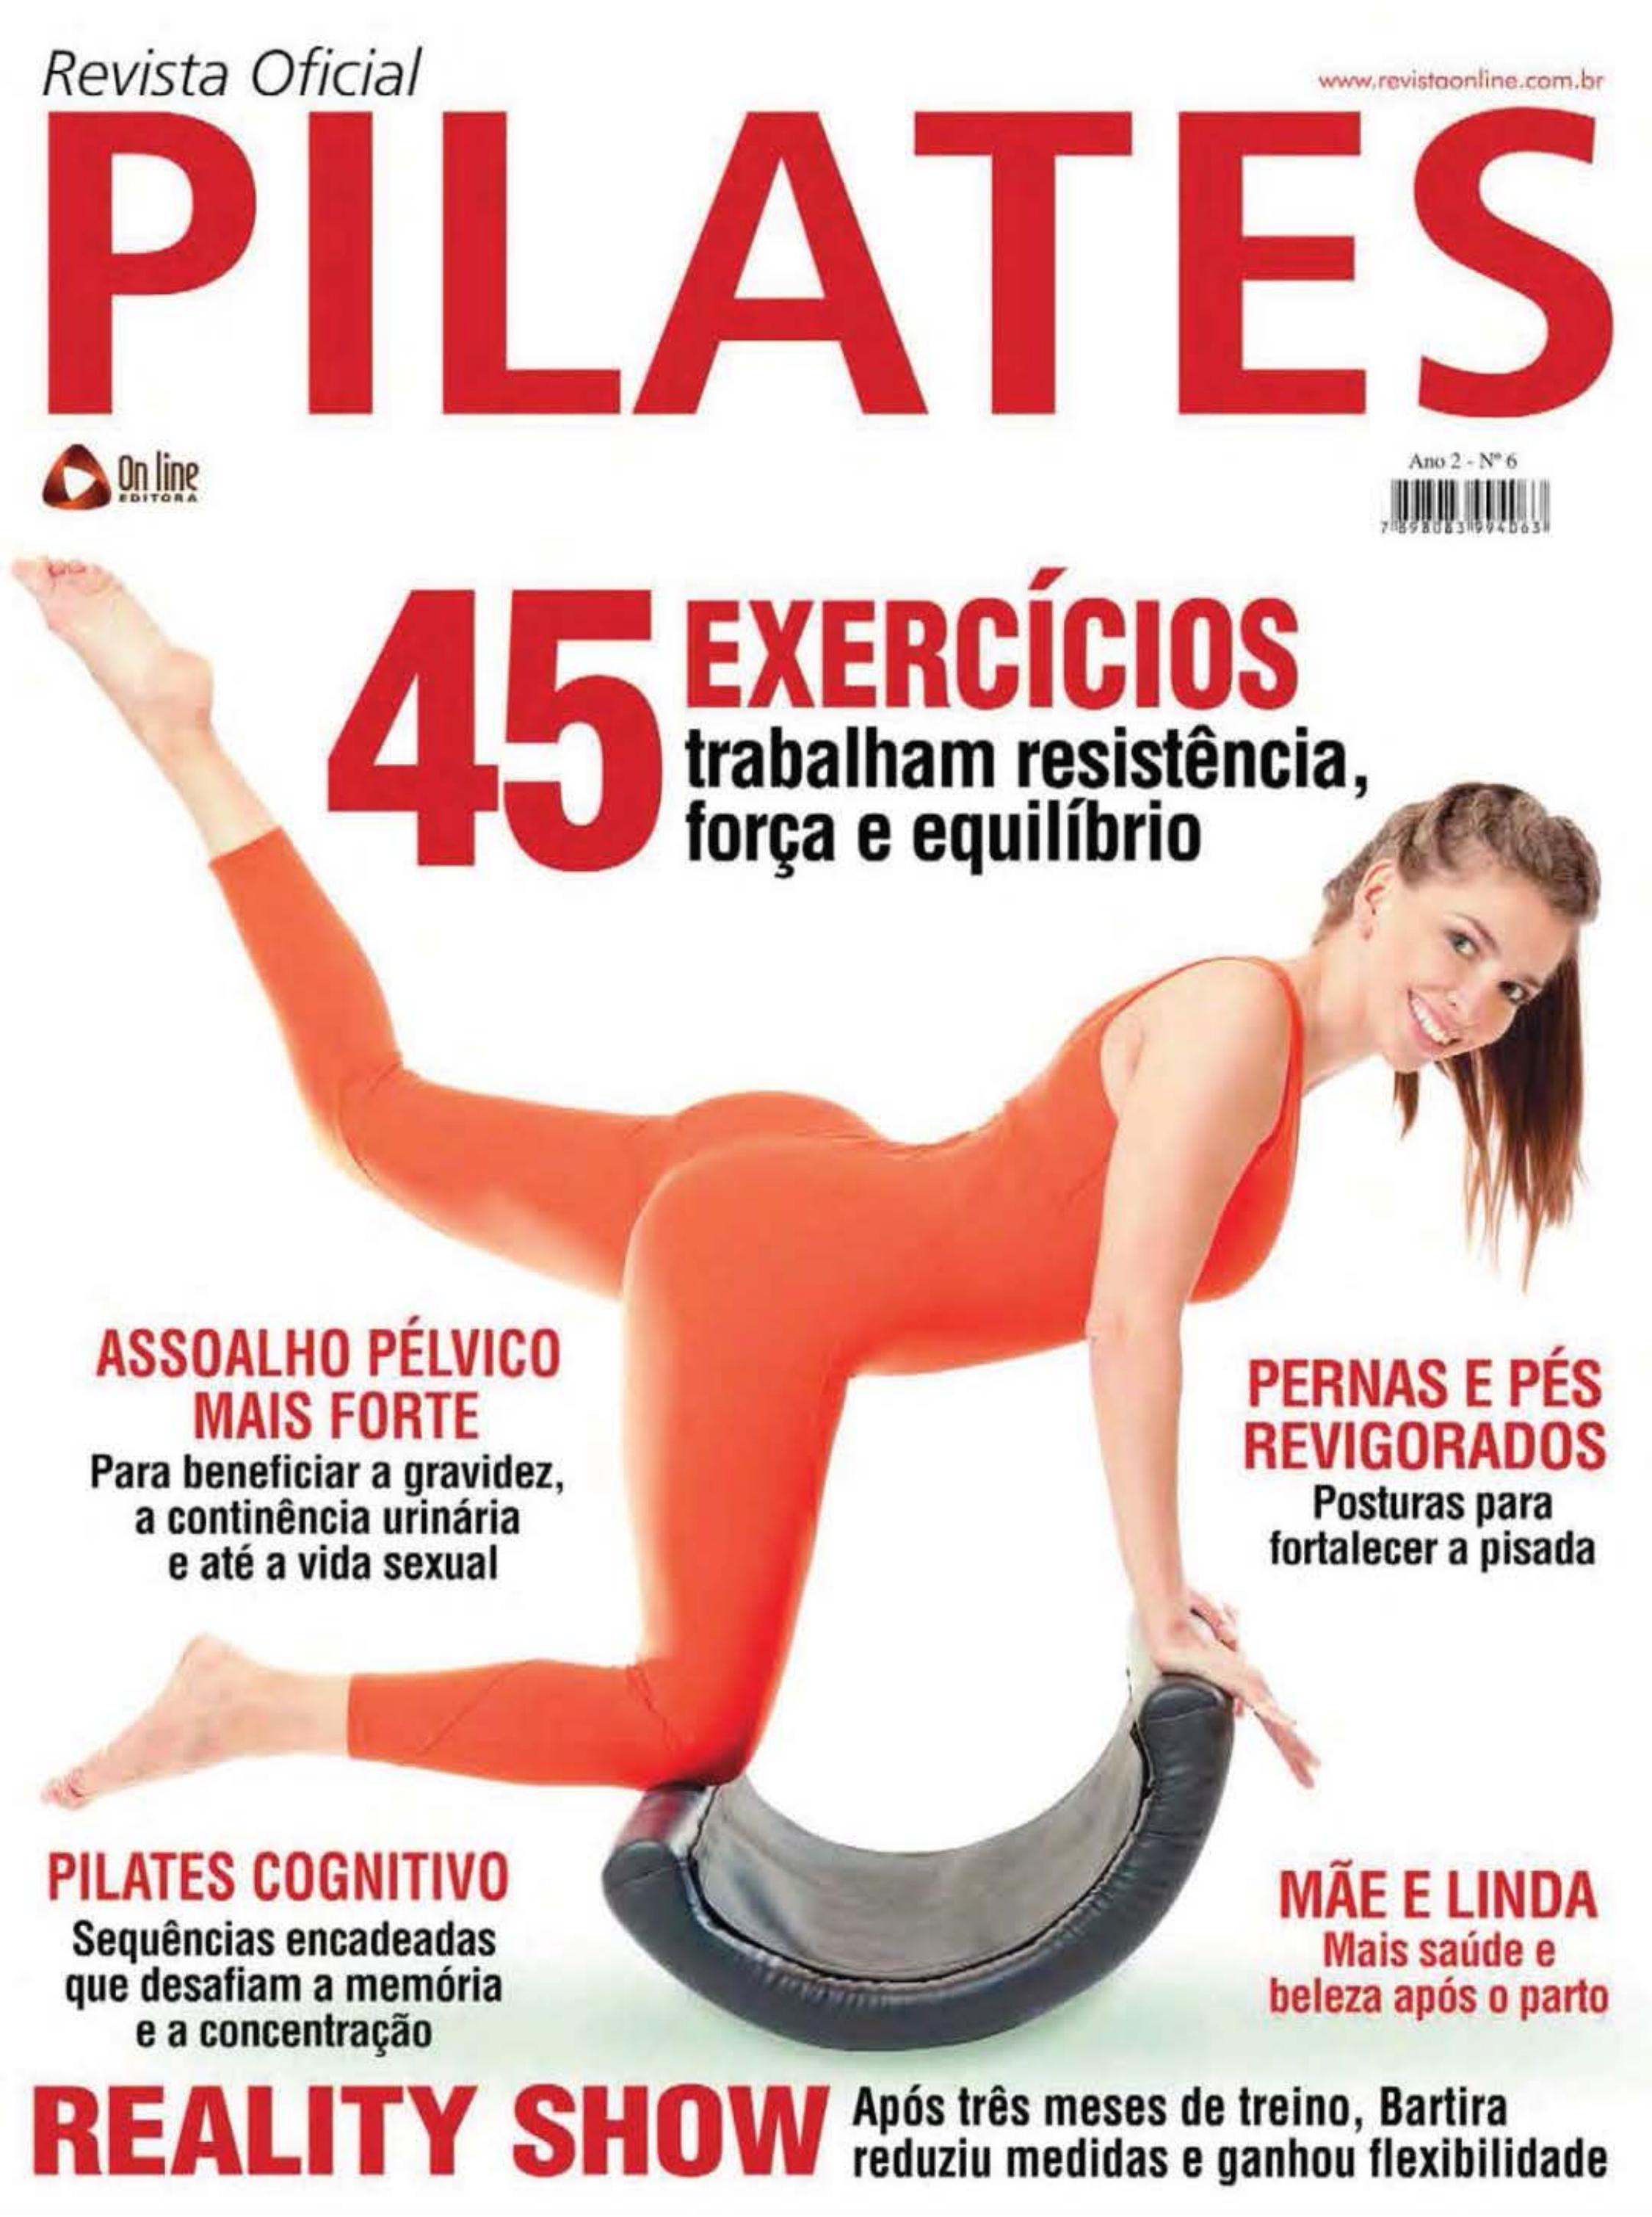 Pilates by Antfer (OR)